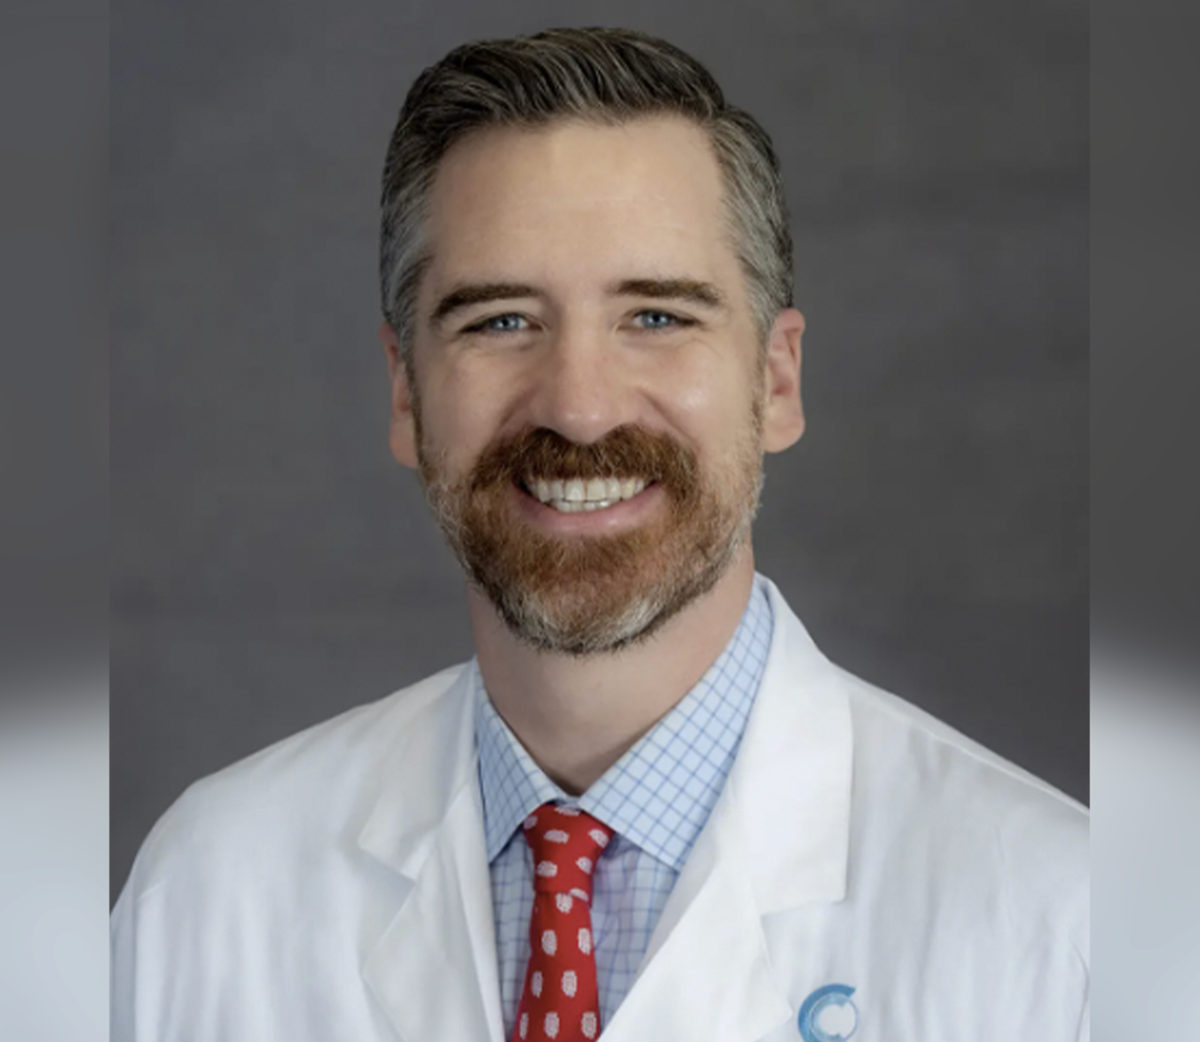 Police name patient who fatally shot Tennessee surgeon Dr Benjamin Mauck in exam room